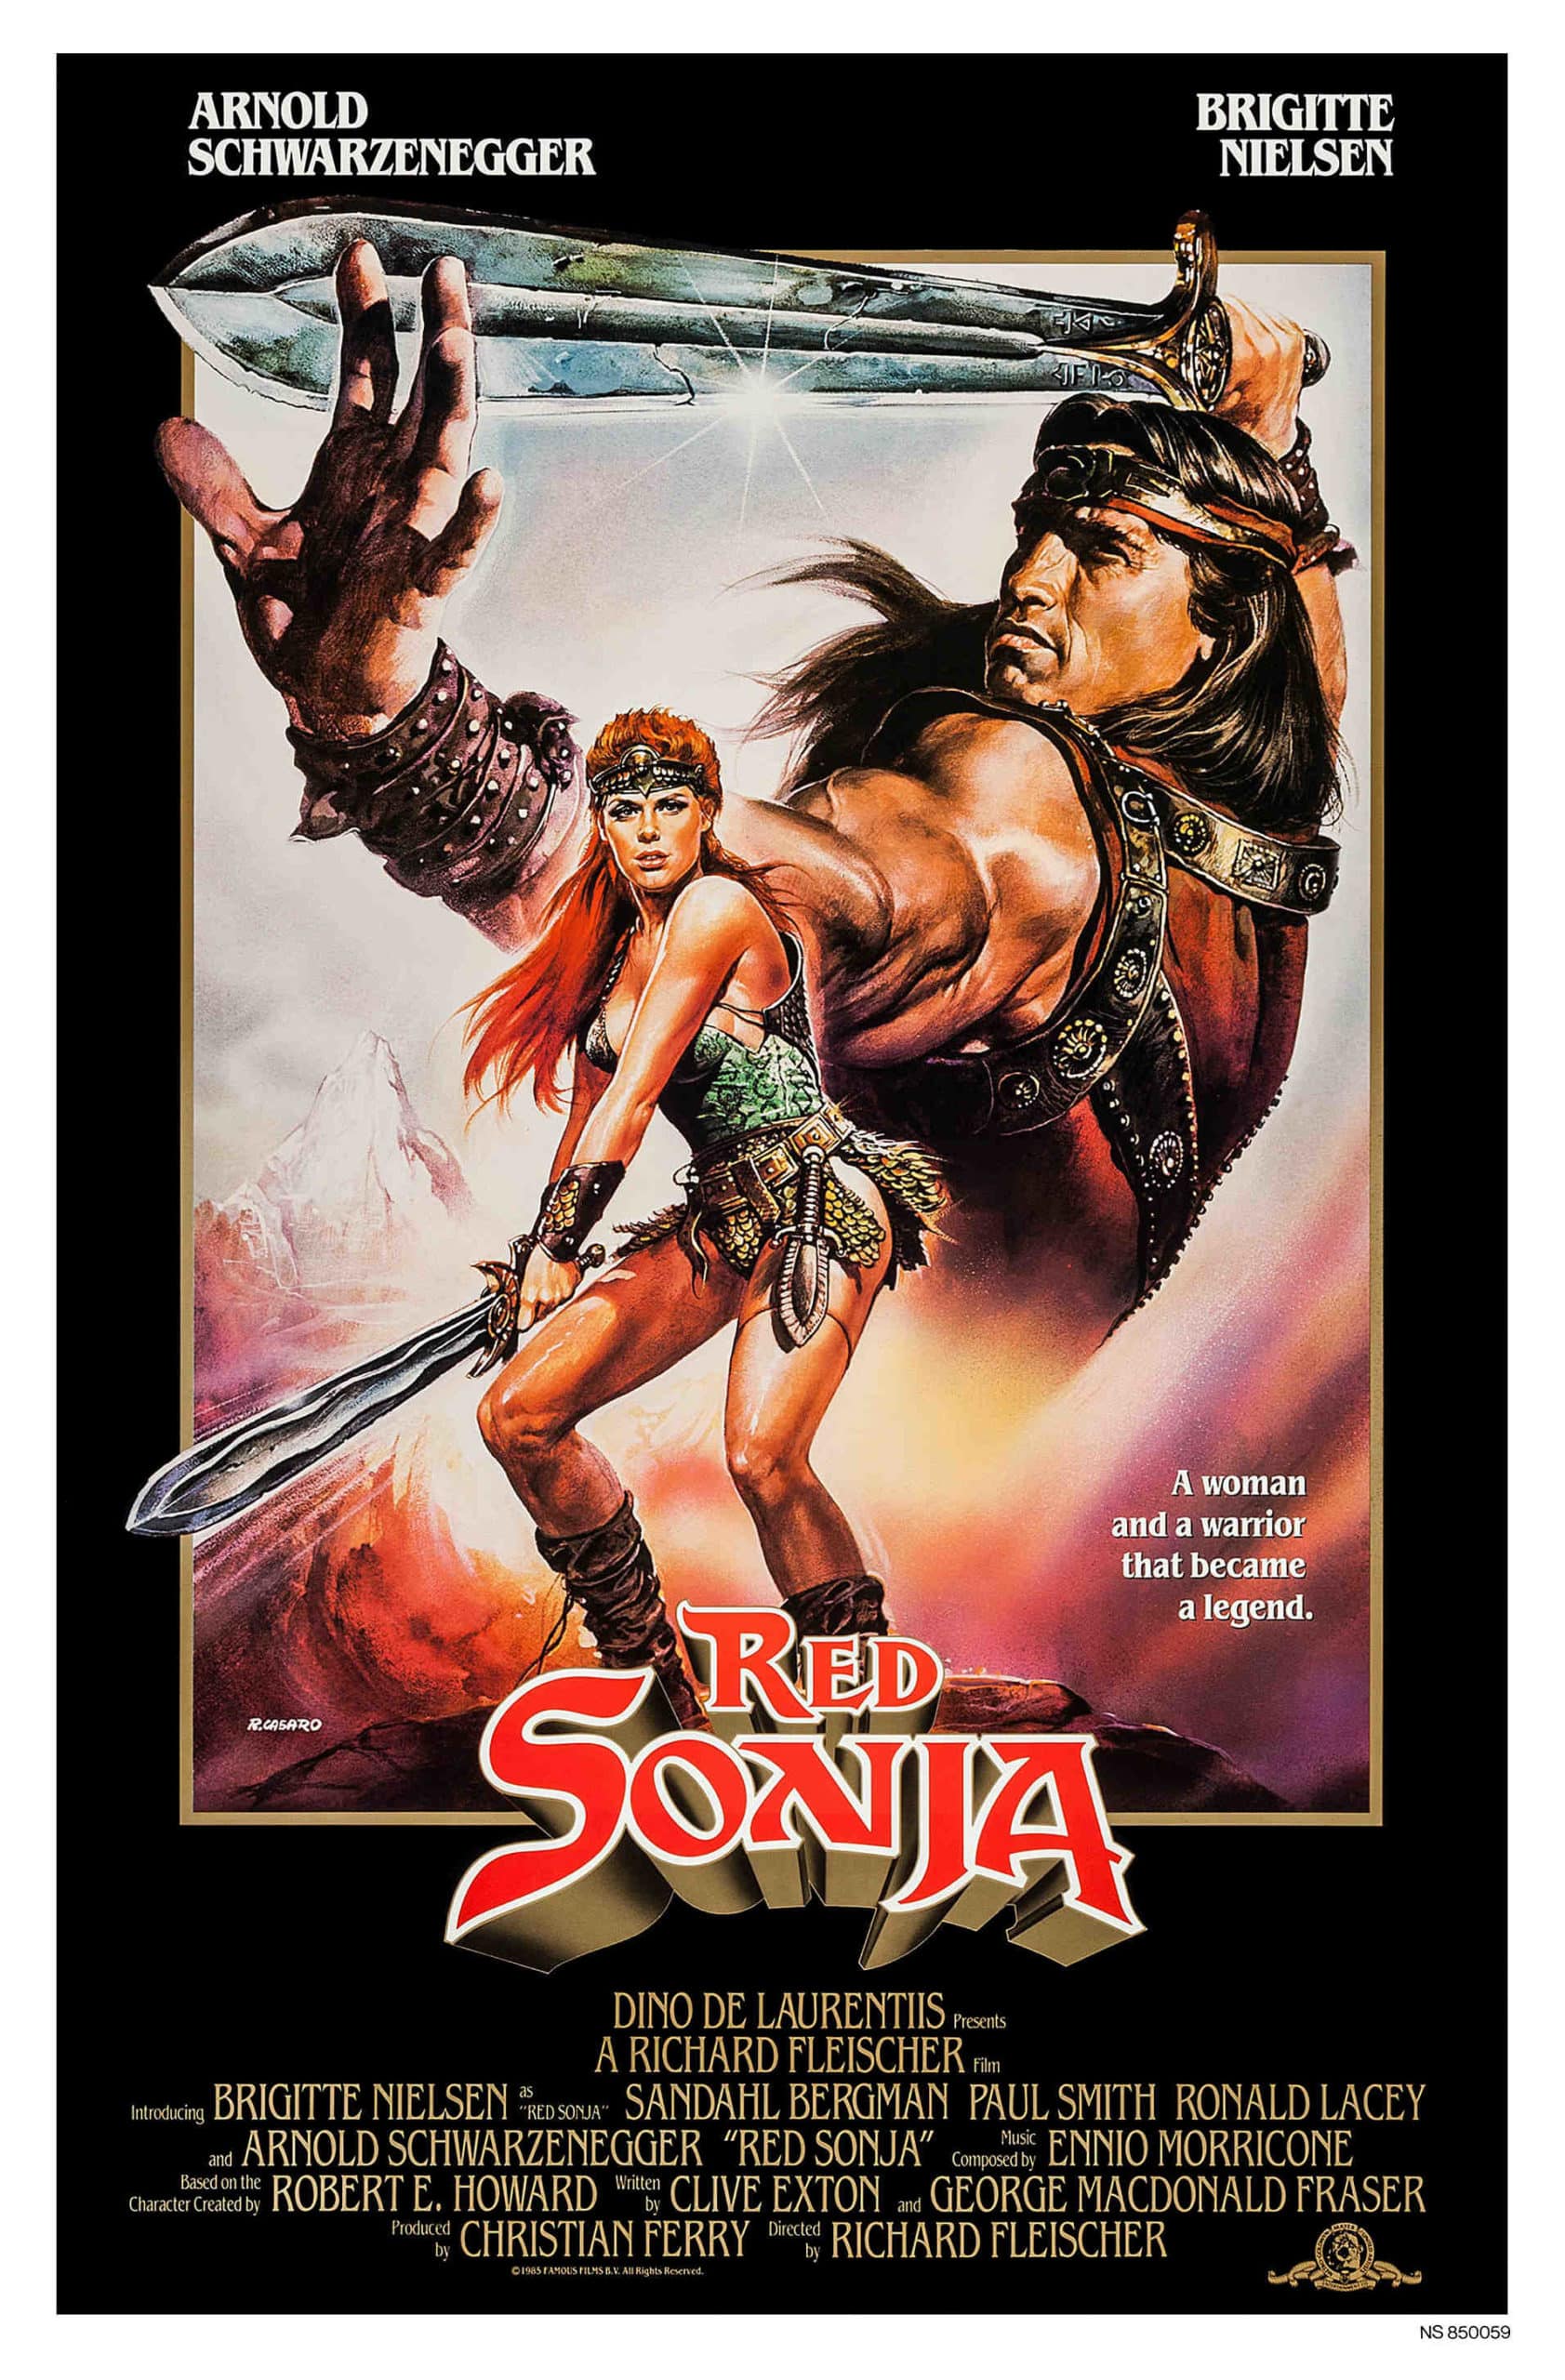 Is Red Sonja part of Conan?